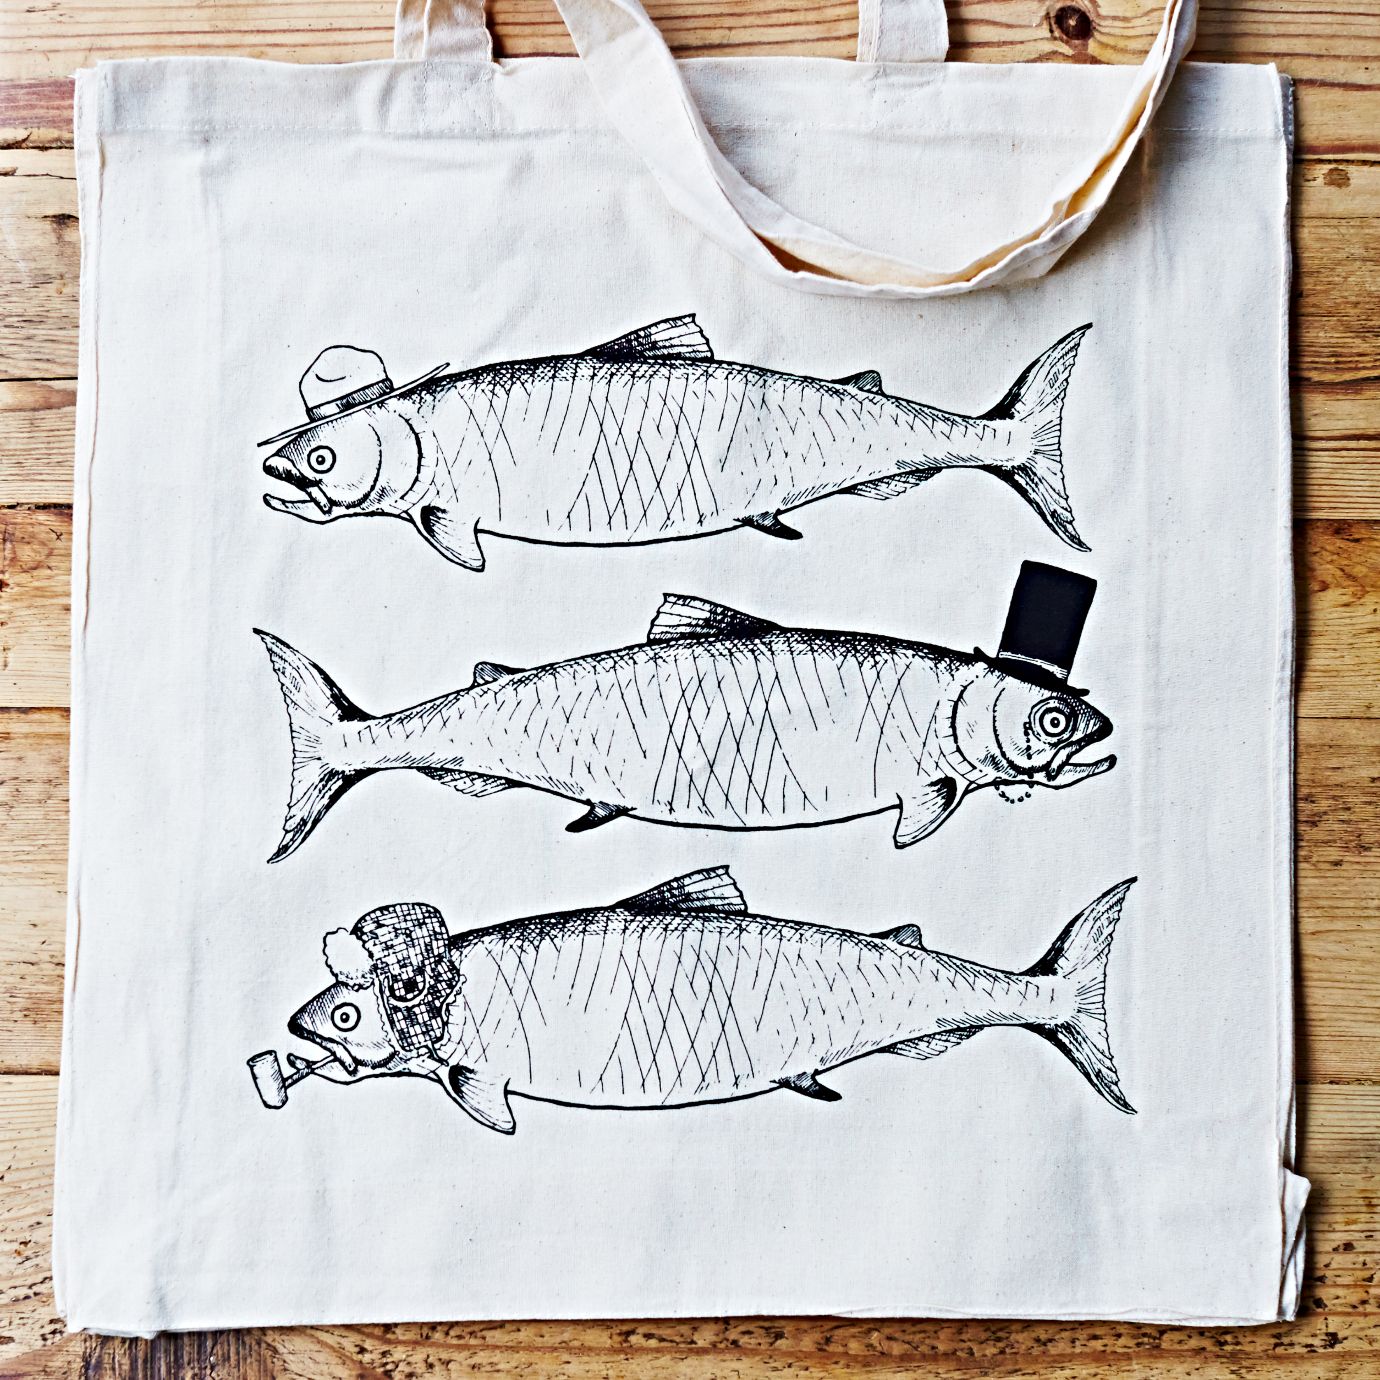 The Pished Fish Limited Edition Tote Gift Bag (1 of 250)